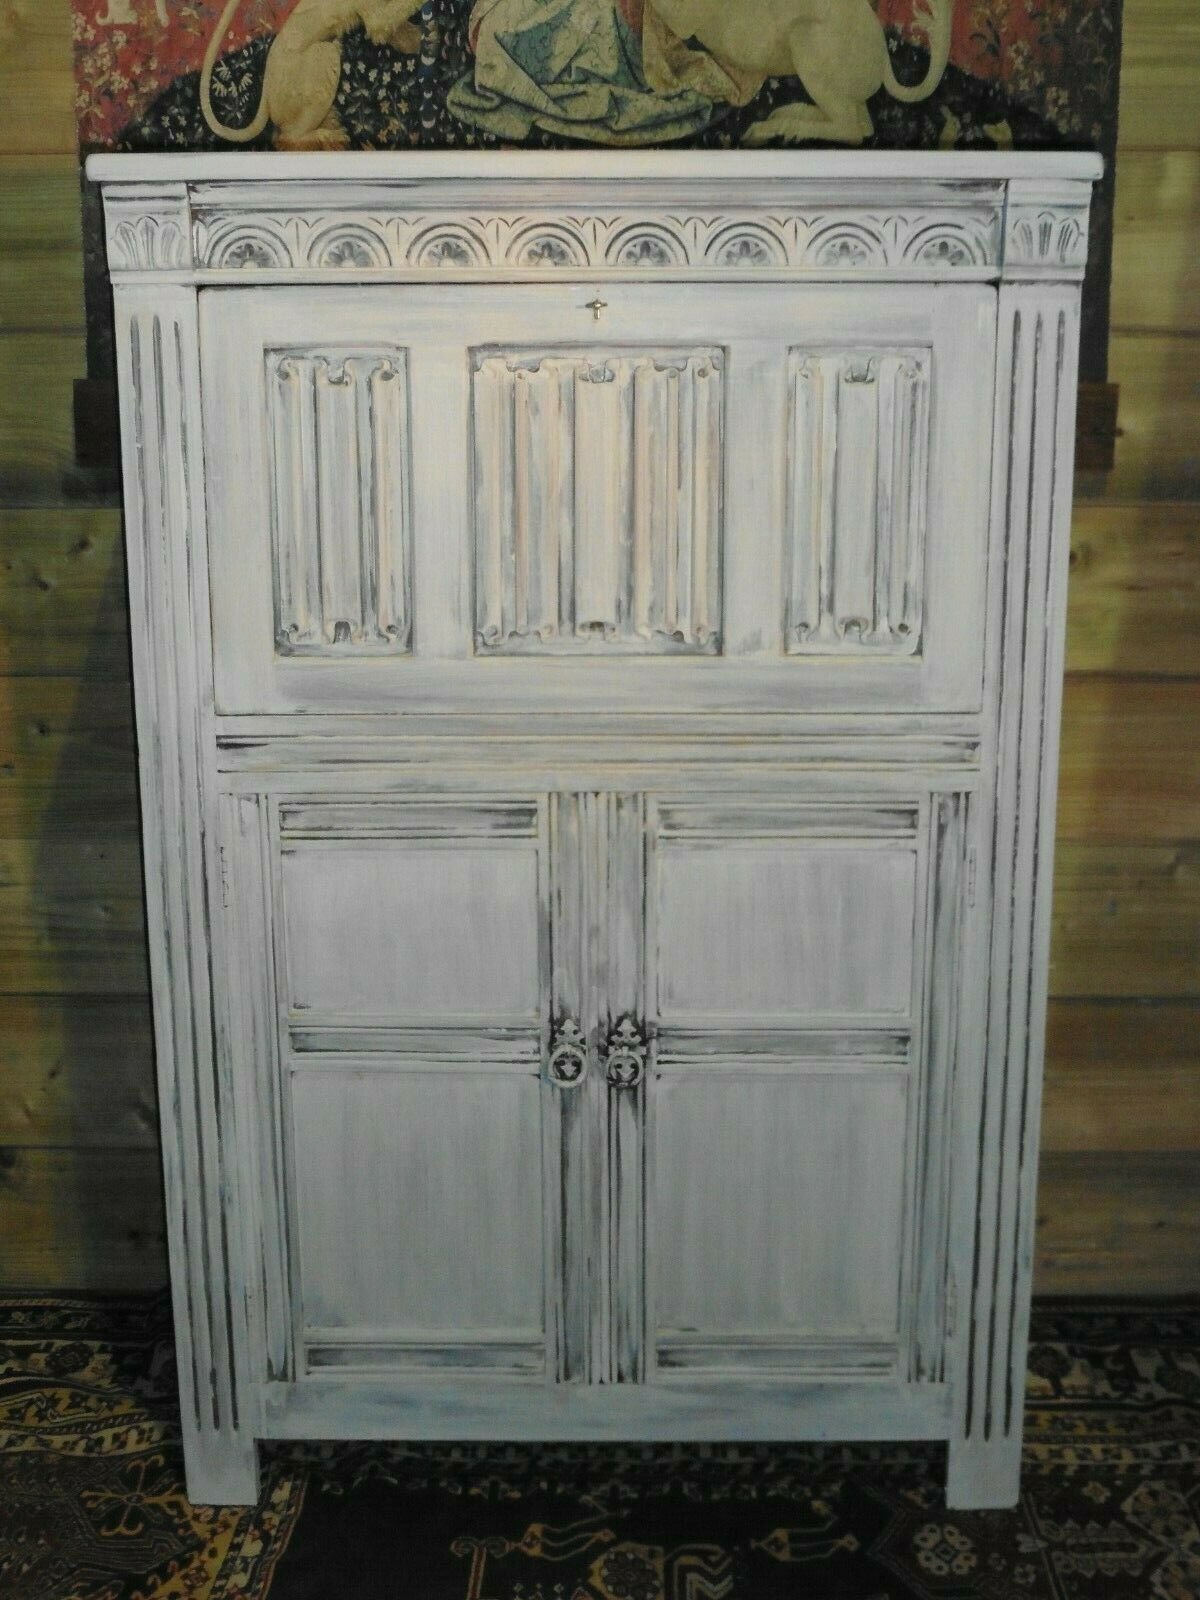 405.....Old Charm Style Drinks Cabinet / Refinished Oak Cocktail Cabinet